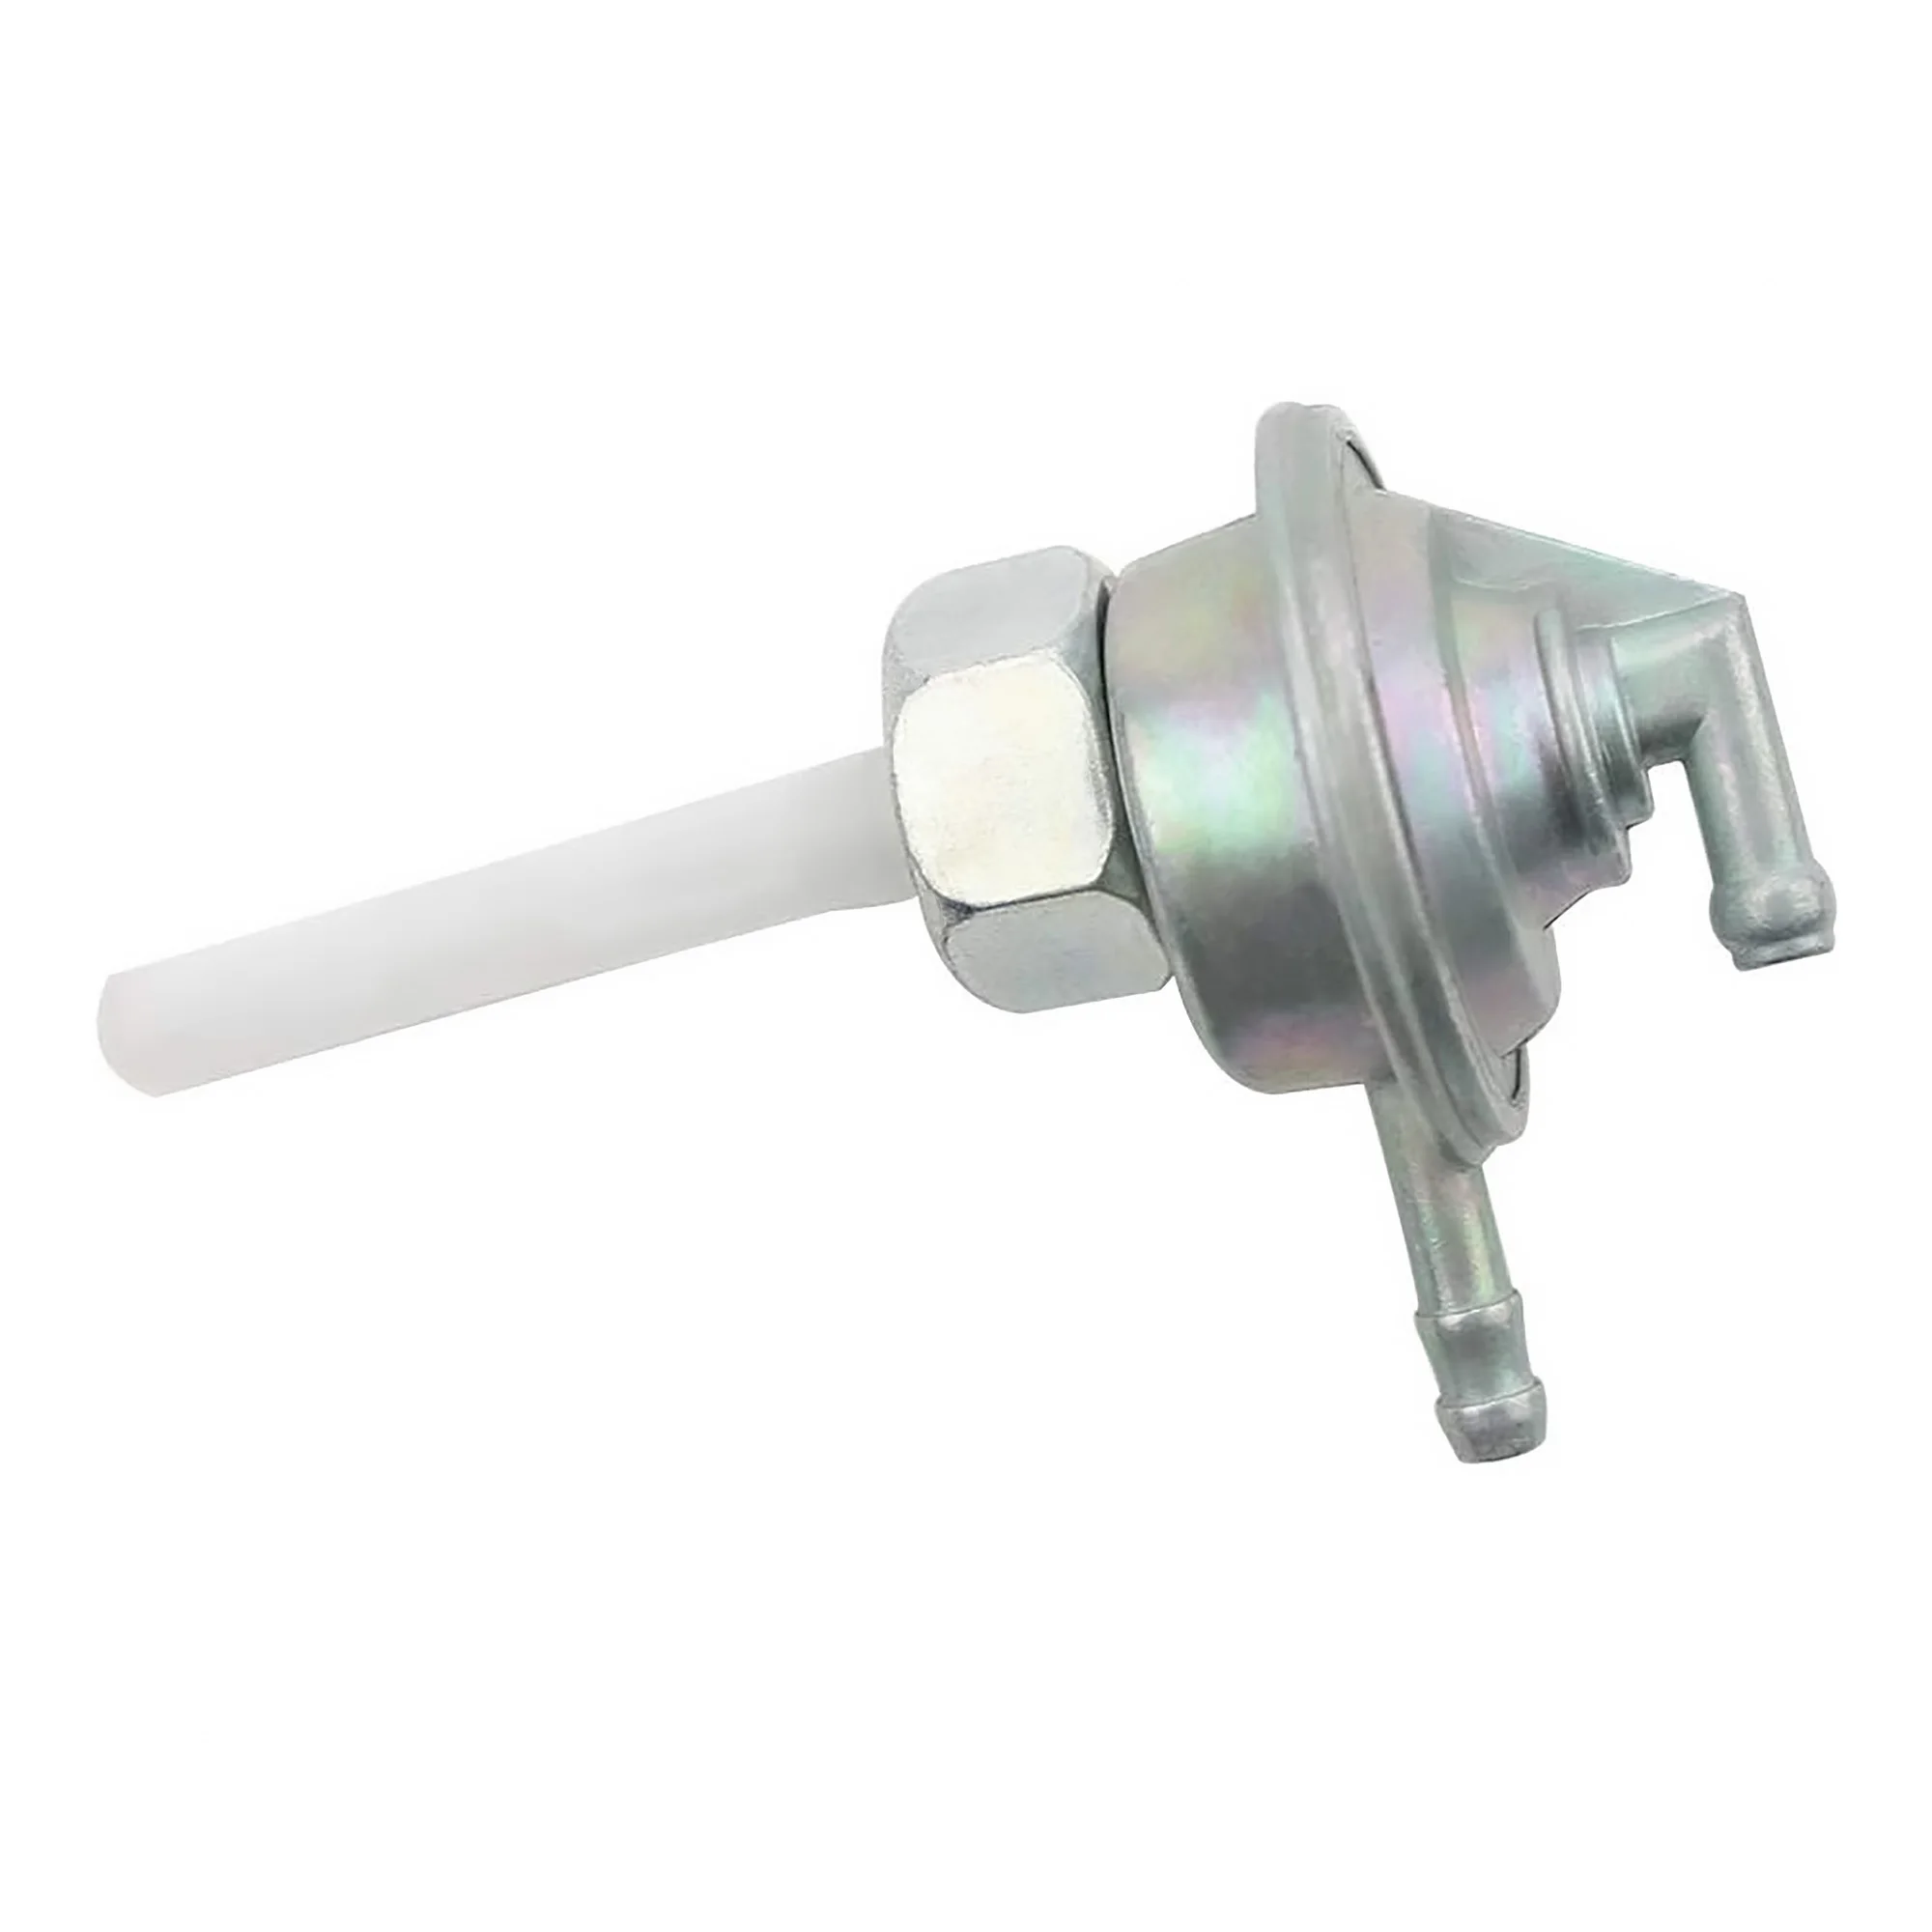 Fuel Low Tension Switch Fuel Pump Valve Petcock for GY6 50cc 150cc ATV Go Kart Moped Scooter 